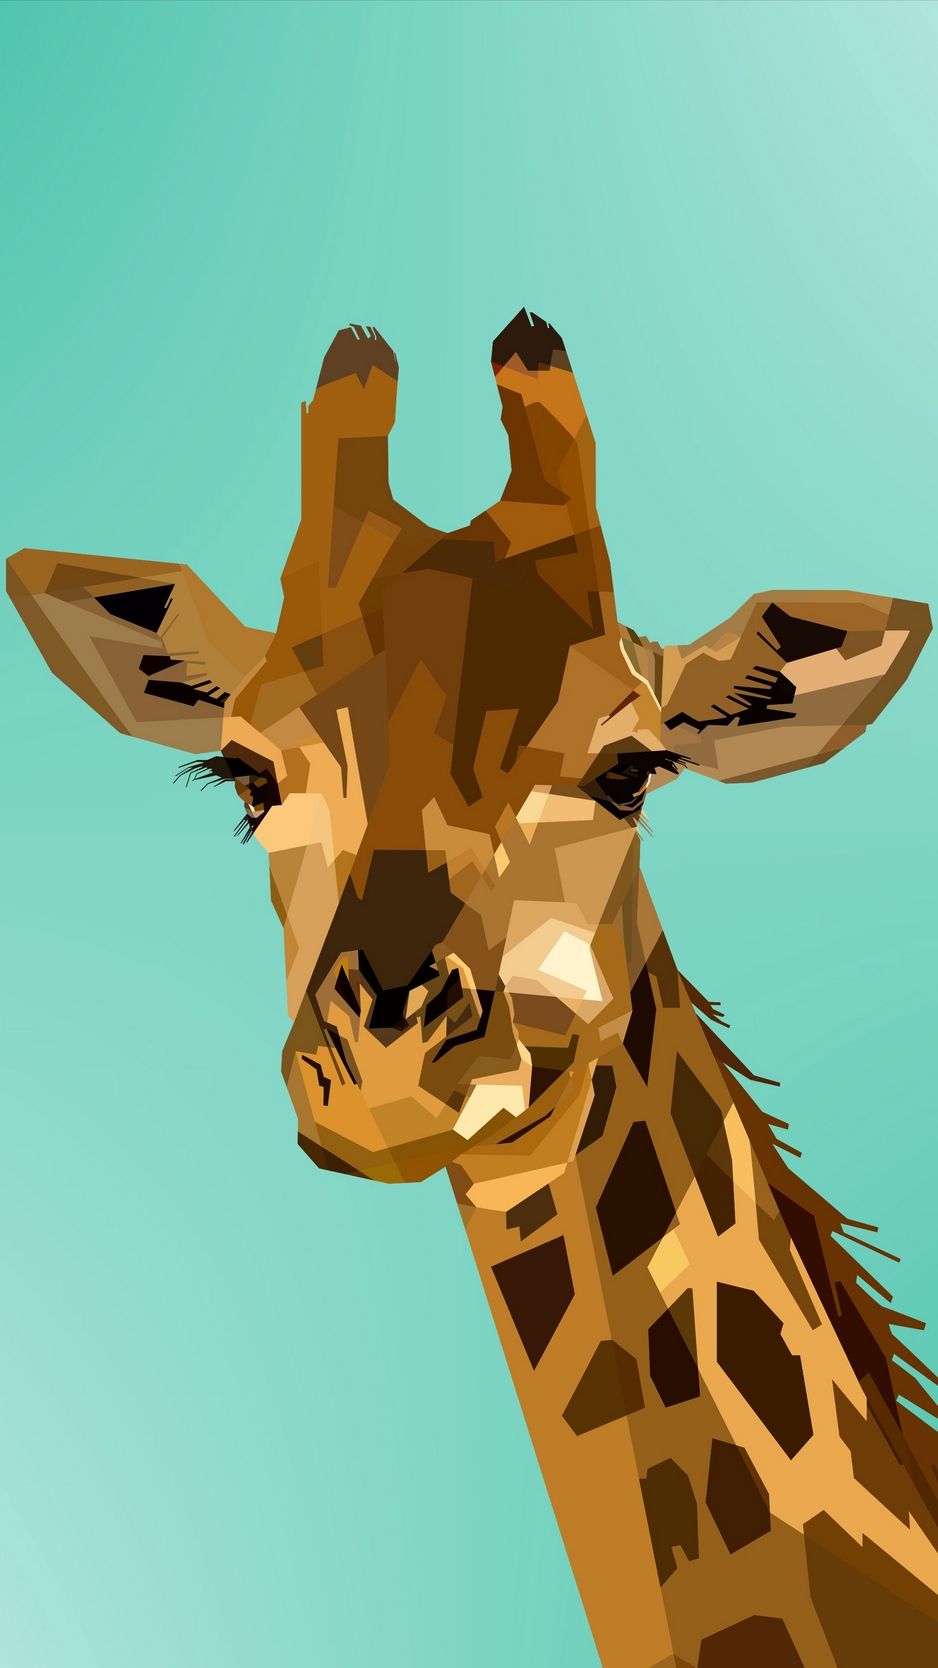 500 Giraffe Pictures HD  Download Free Images on Unsplash